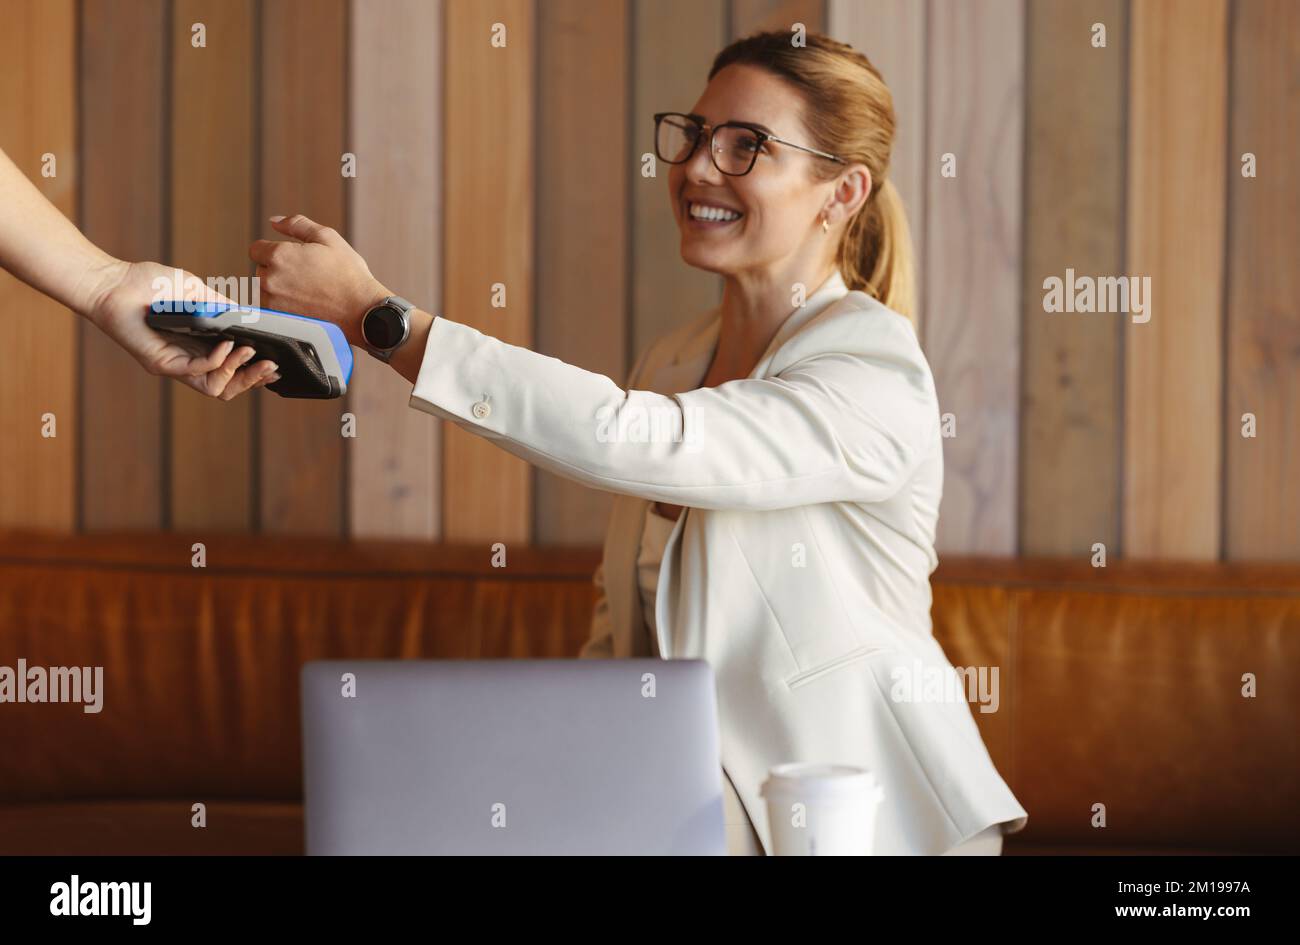 Woman scanning her smartwatch on a card machine to make a payment. Professional woman using NFC technology. business woman buying coffee while working Stock Photo